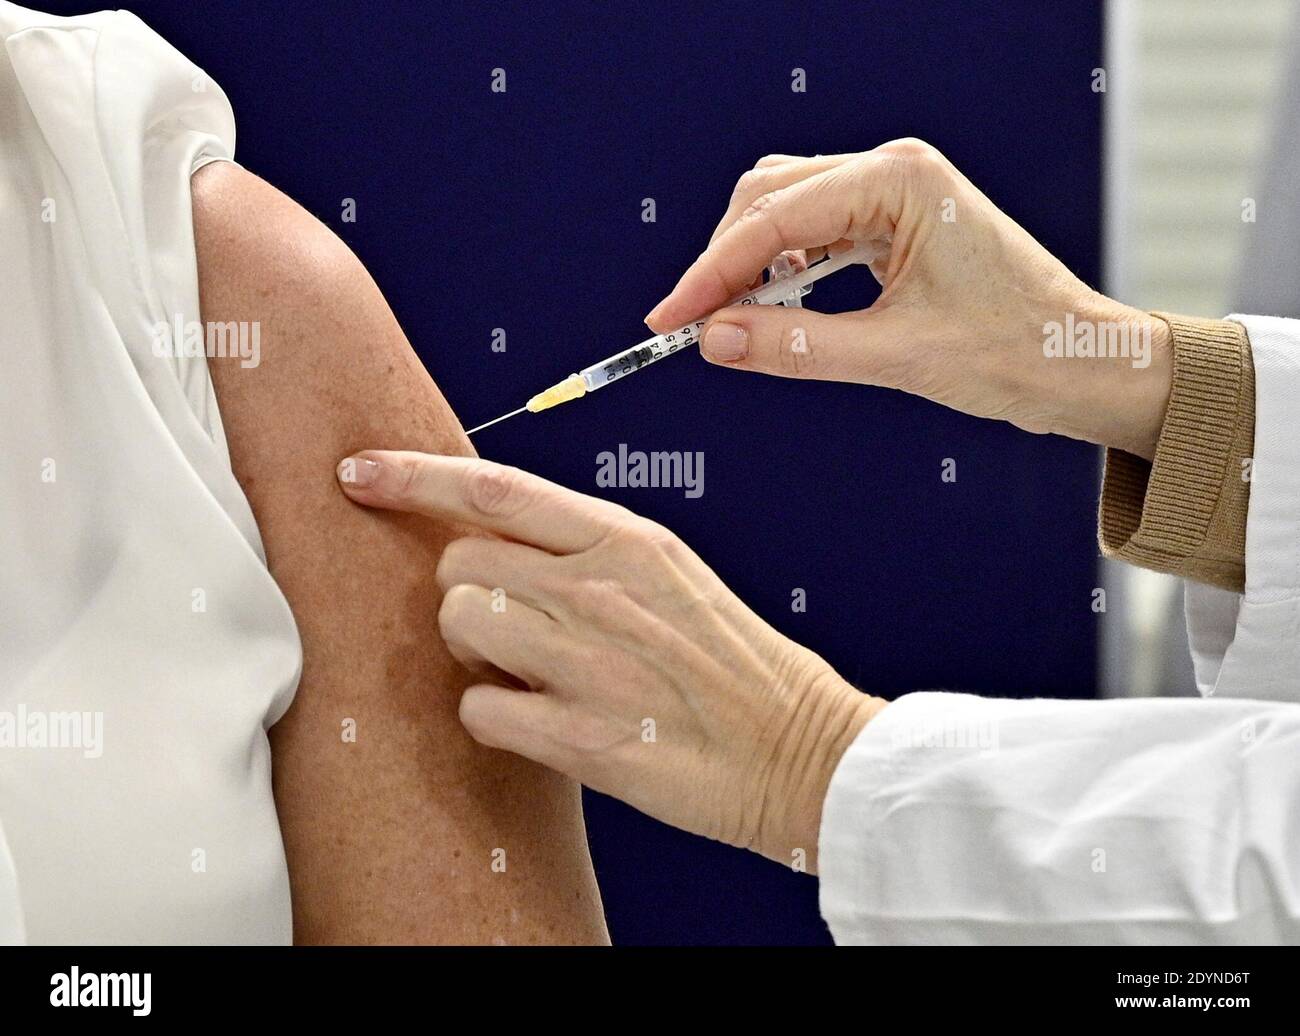 A woman receives the Pfizer/BioNTech COVID-19 vaccine at the MedUni Wien in Vienna, Austria December 27, 2020, the day when the country starts its vaccination programme. Hans Punz/Pool via Reuters Stock Photo